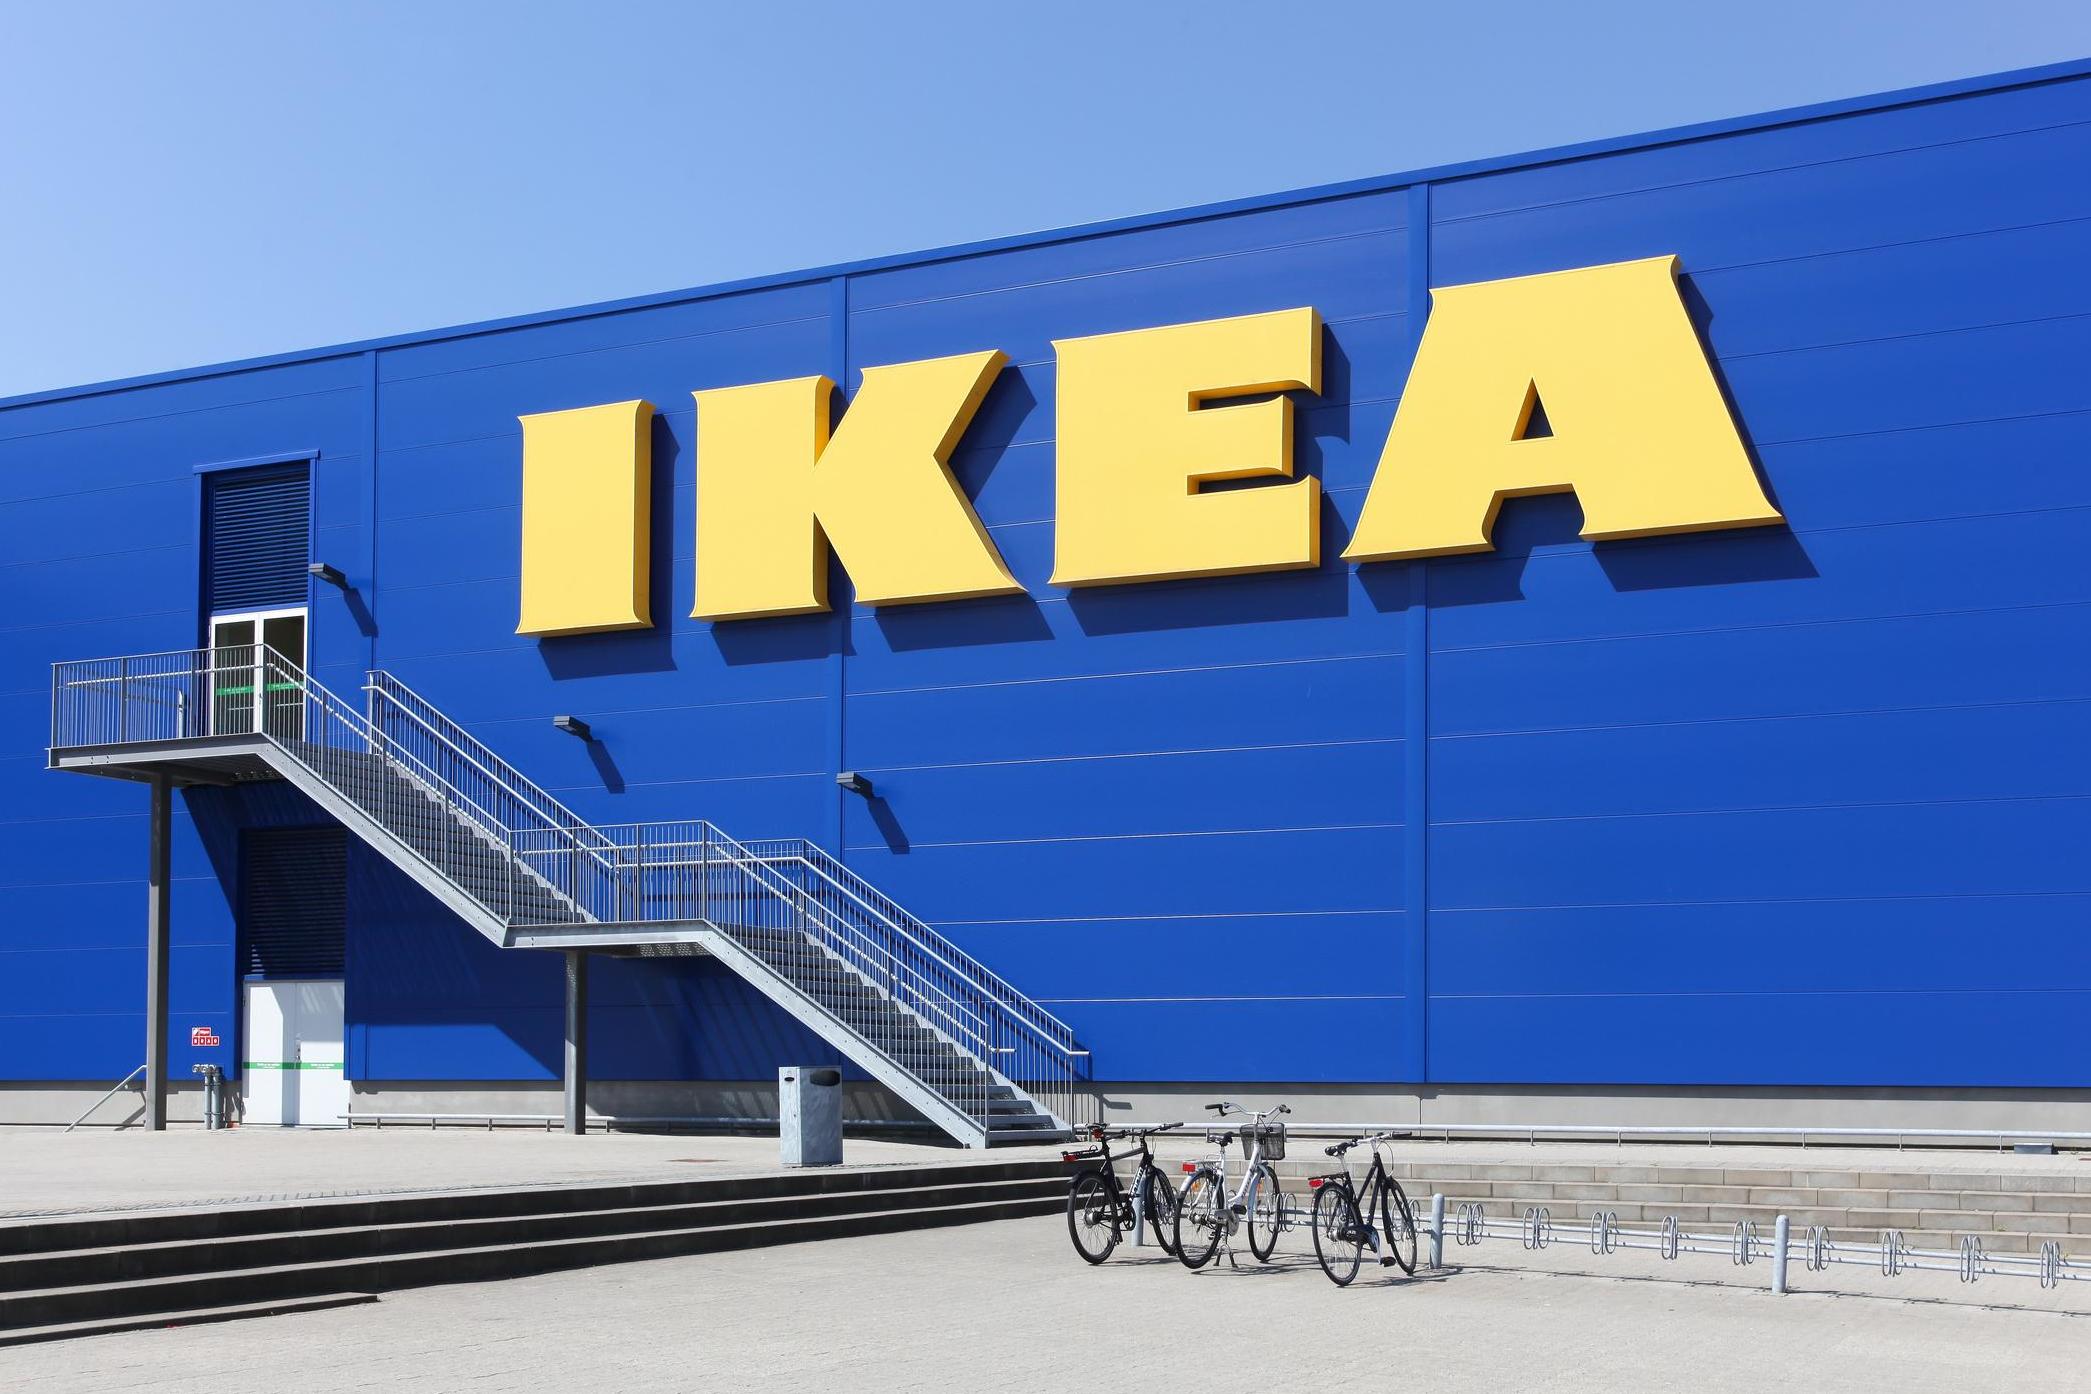 Ikea currently owns 415 wind turbines